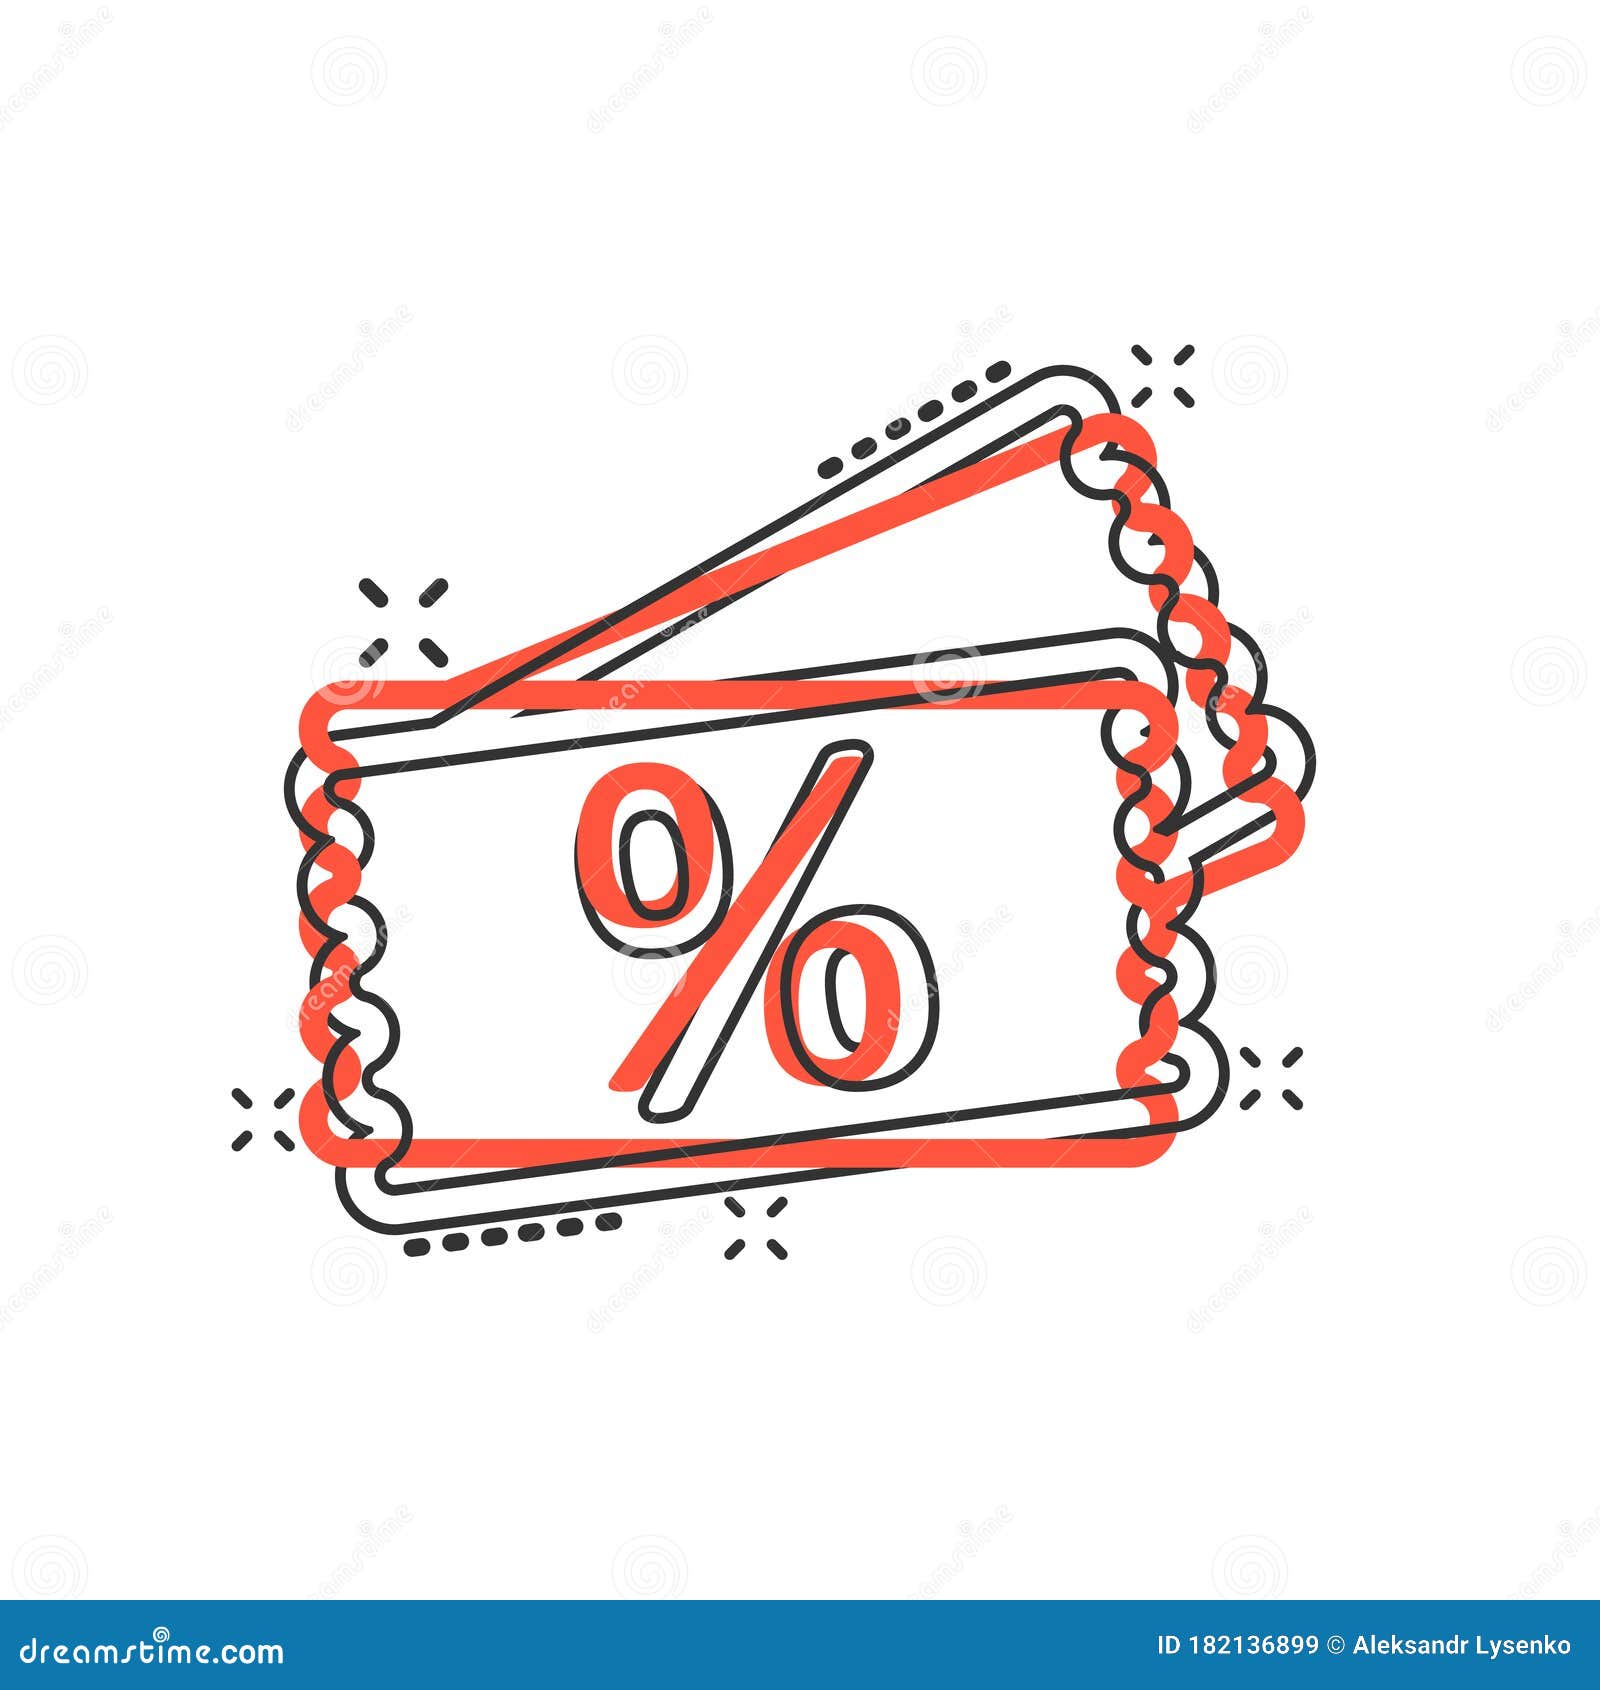 Price Coupon Icon in Comic Style. Discount Tag Cartoon Sign Vector